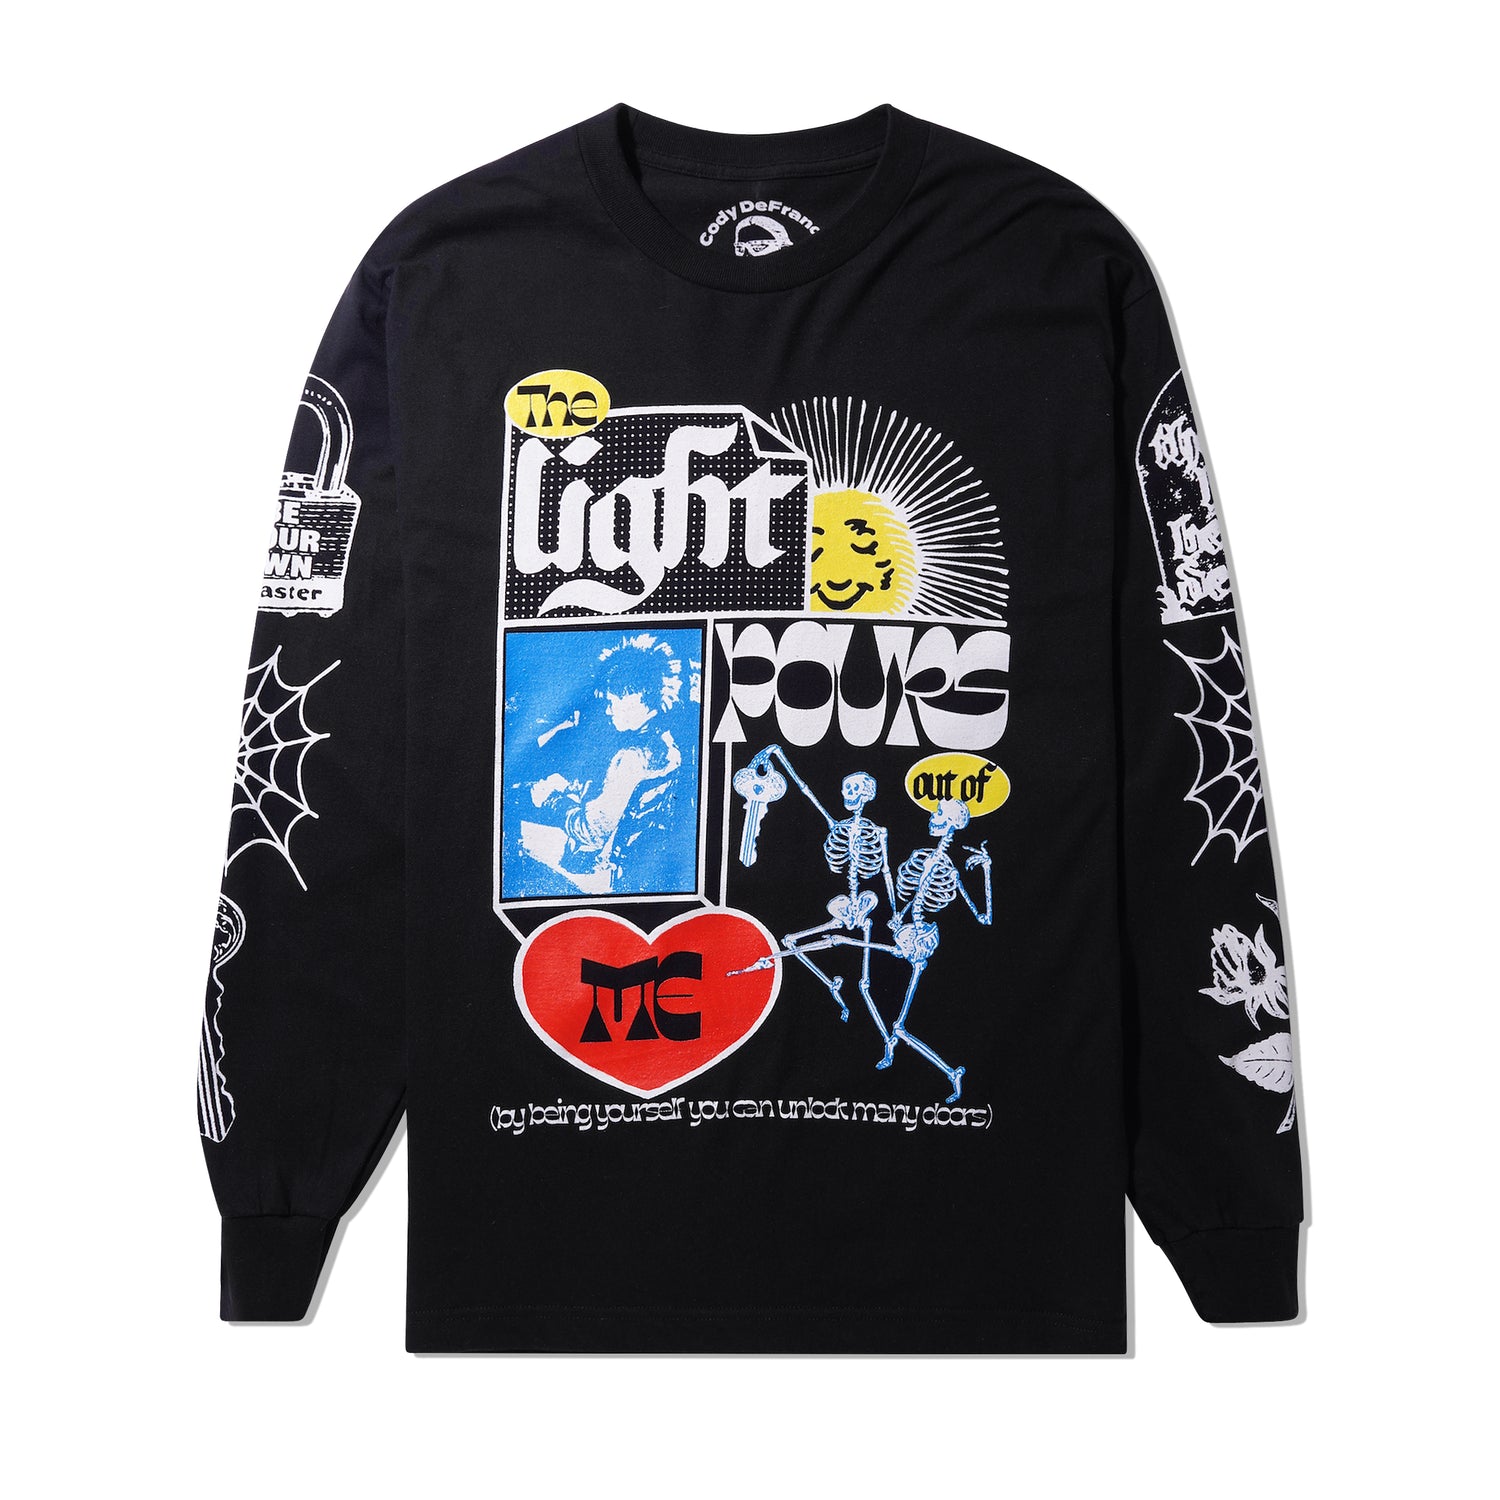 The Light Pours Out Of Me L/S Tee, Black